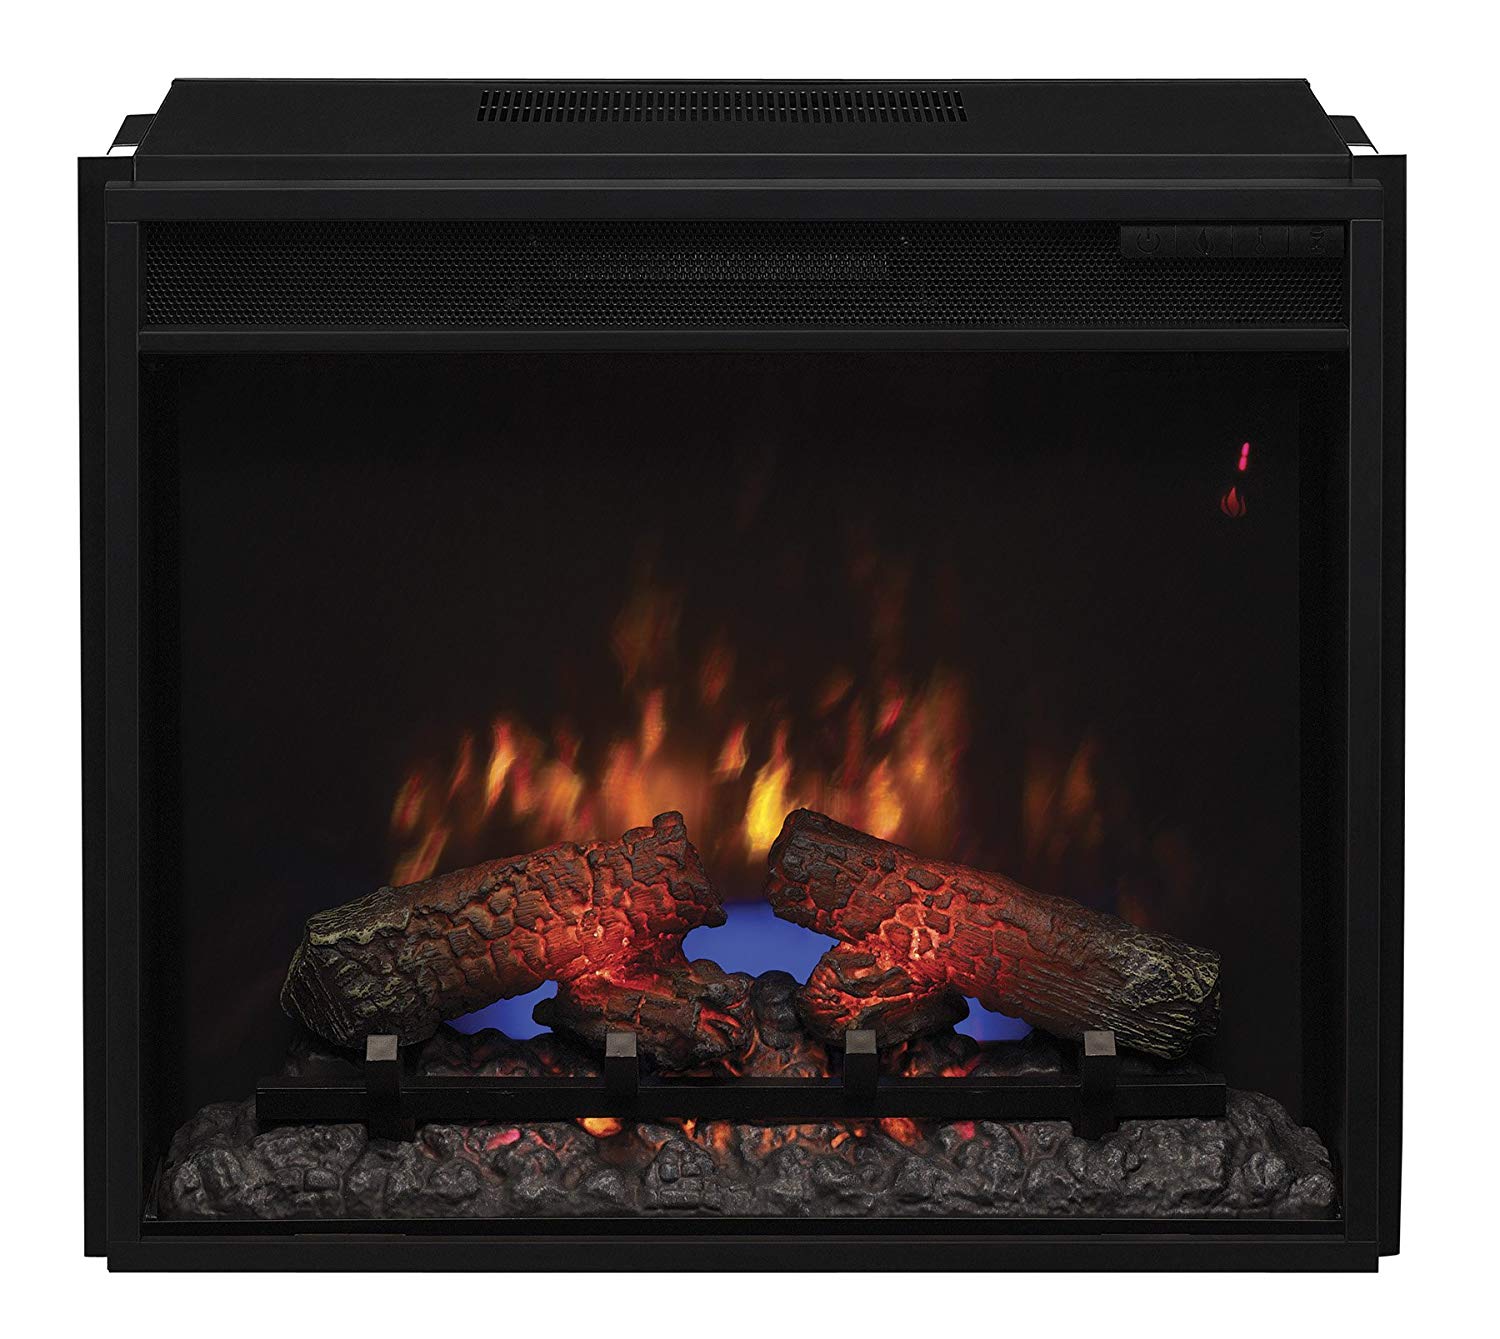 Tv Above Electric Fireplace Elegant Classicflame 23ef031grp 23" Electric Fireplace Insert with Safer Plug